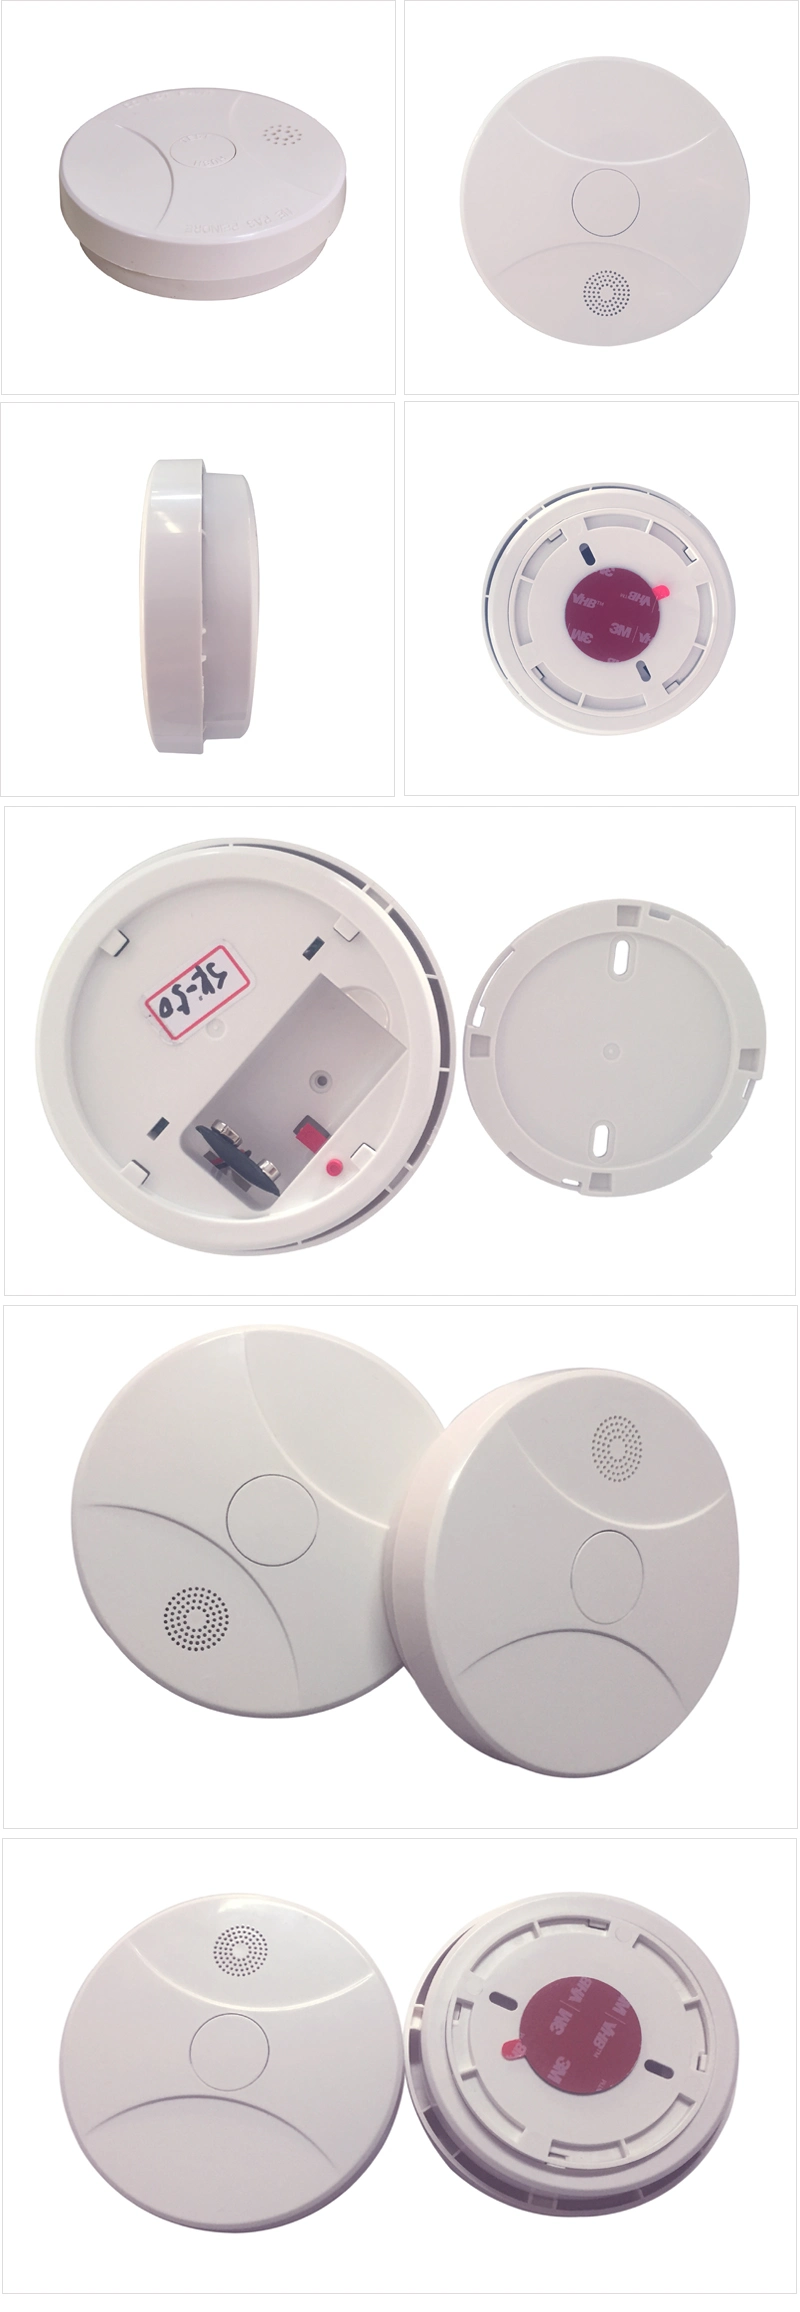 Fire Protection Smoke Detector Alarm Monitor Home Security System